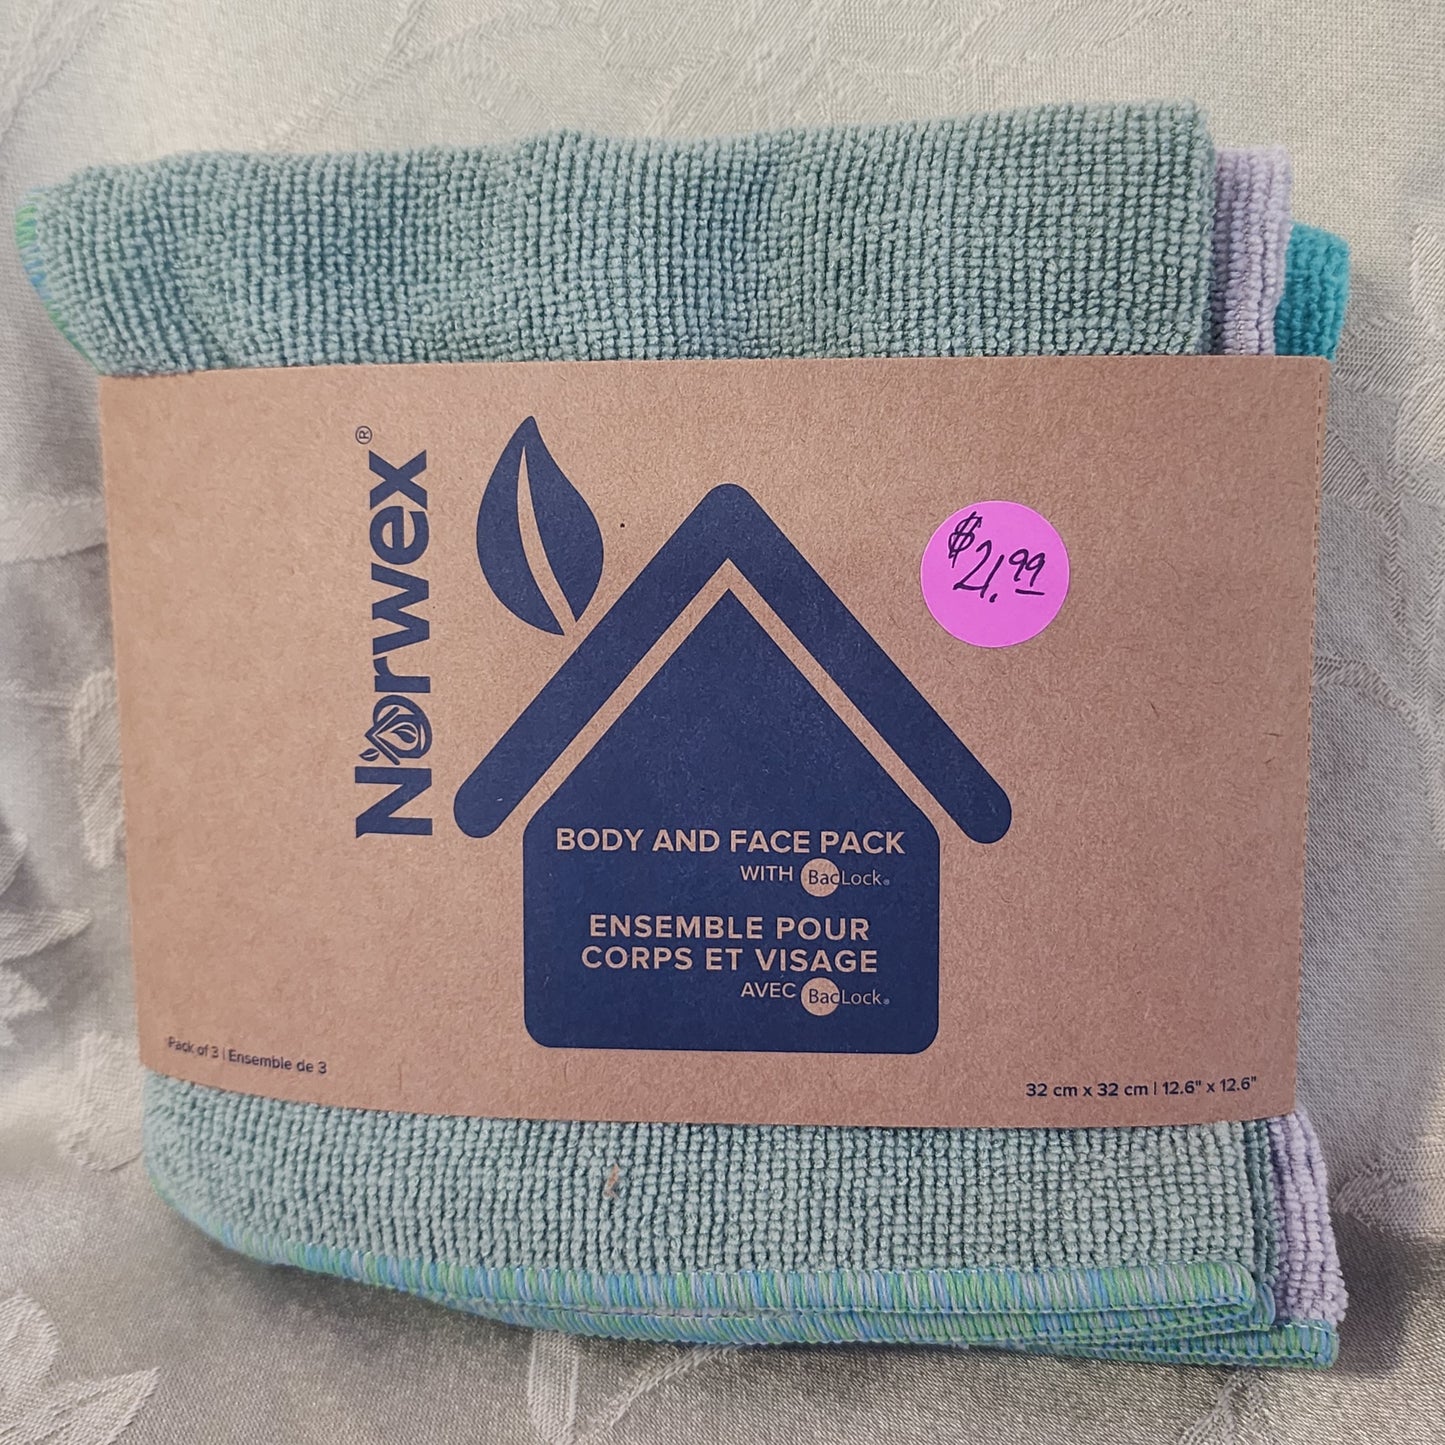 BODY AND FACE PACK by Norwex